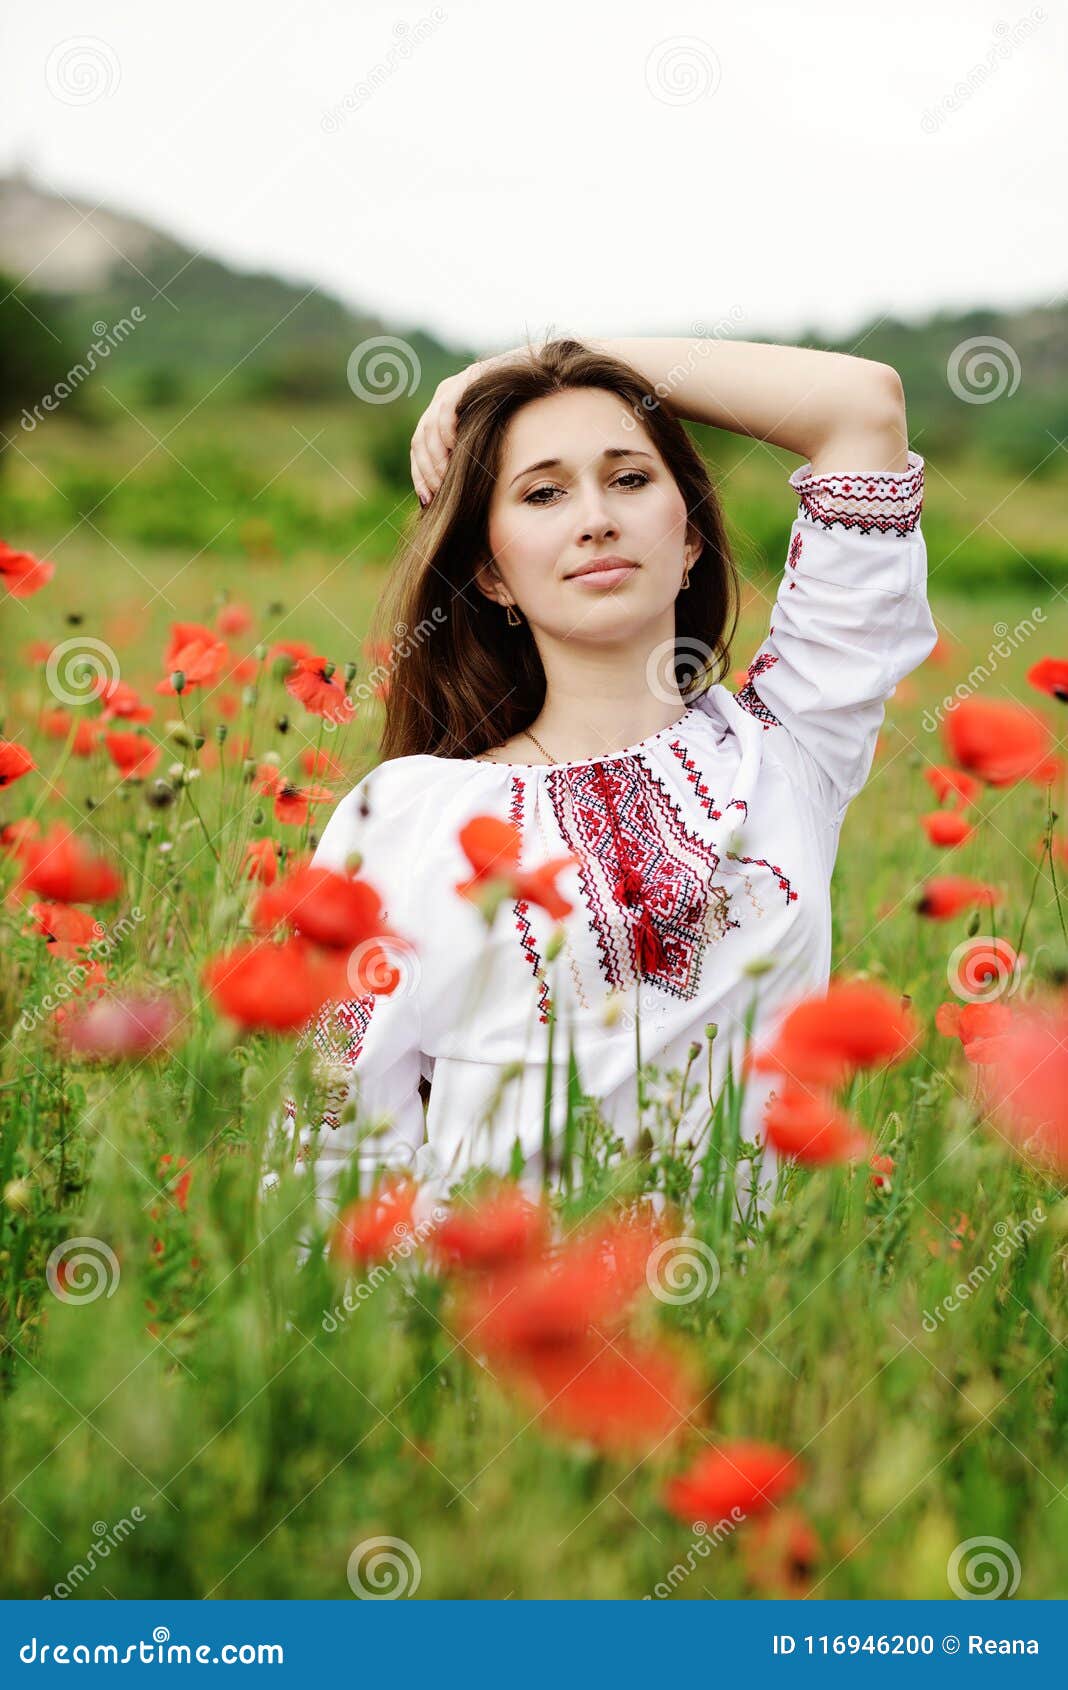 Ukrainian Girl in Field of Poppies Stock Photo - Image of lifestyle ...